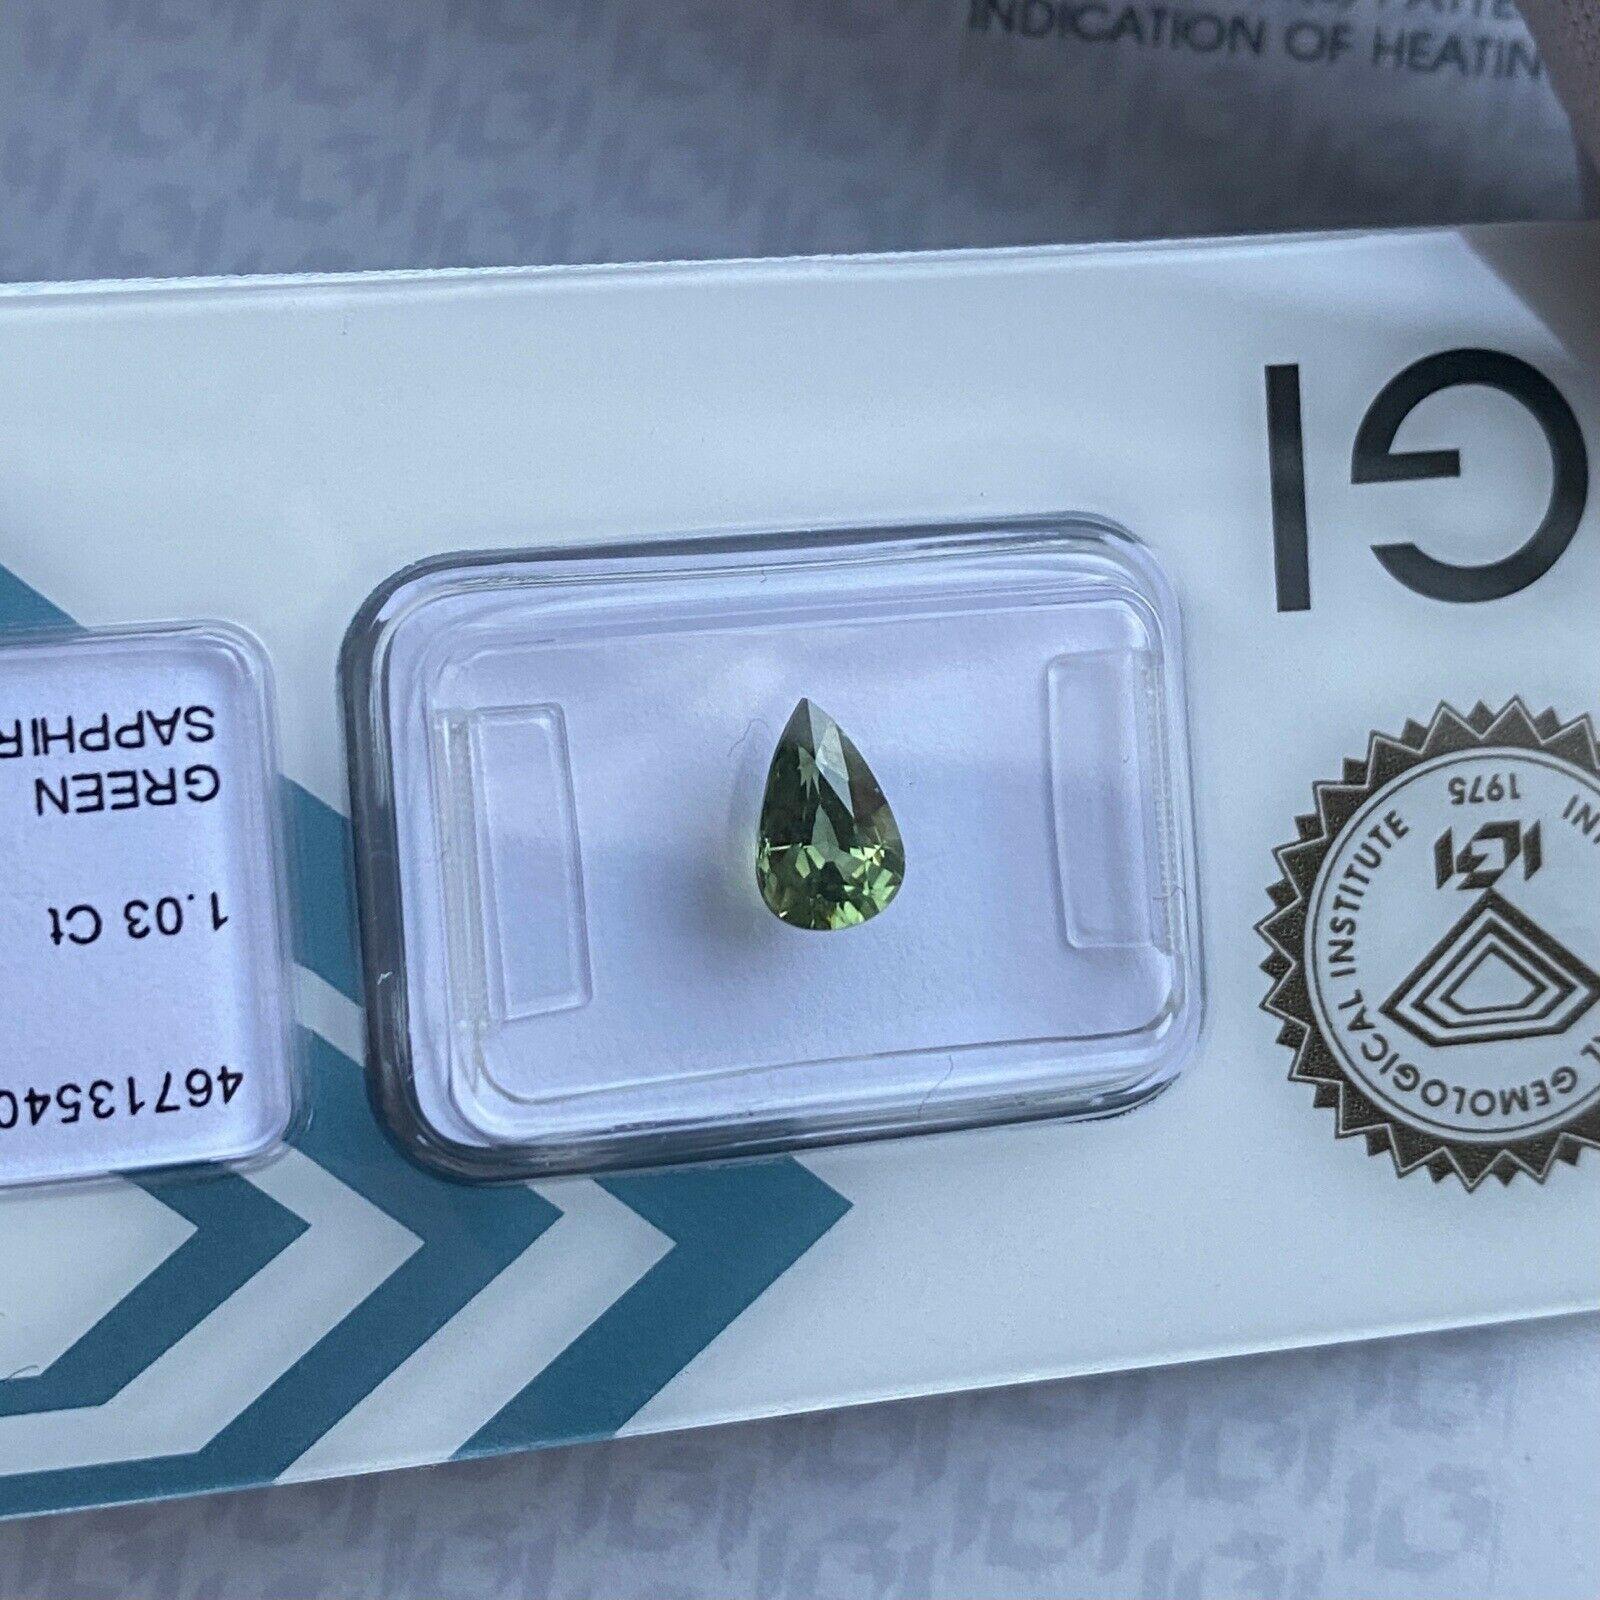 1.03ct Untreated Green Blue Sapphire IGI Certified Unheated Pear Cut Gem

Fine Blue Green Untreated Sapphire In IGI Blister. 
1.03 Carat with an excellent oval cut and totally untreated/unheated which is very rare for natural sapphires. Confirmed as